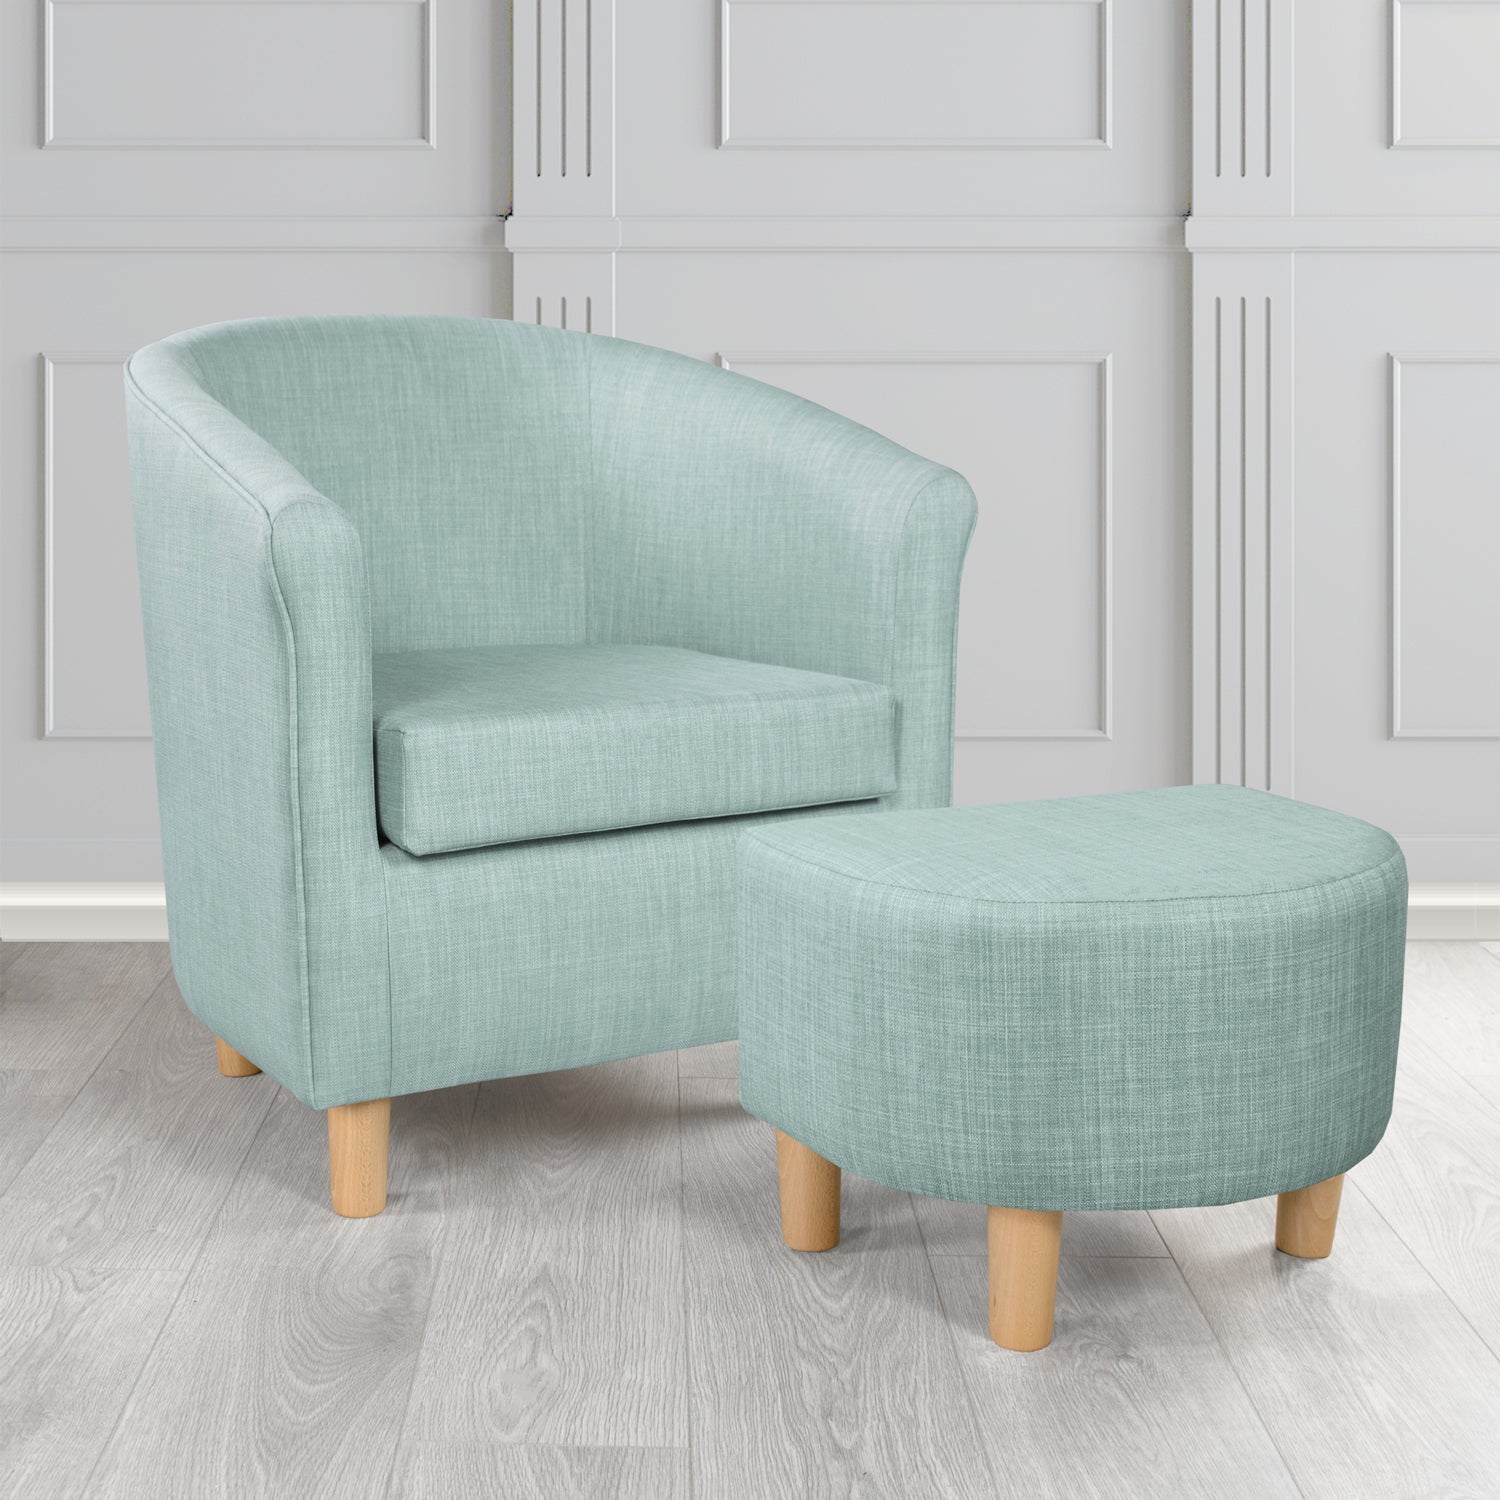 Tuscany Charles Sky Linen Plain Fabric Tub Chair with Dee Footstool Set - The Tub Chair Shop